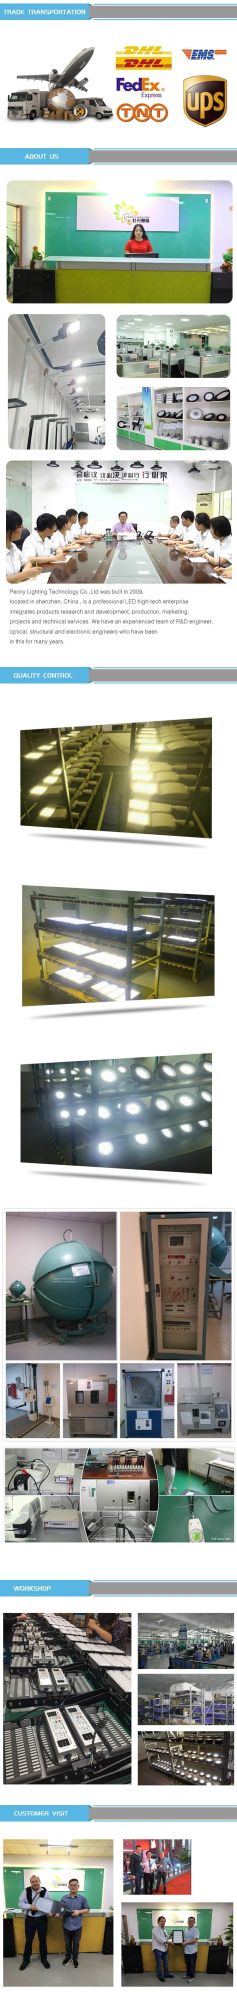 Newest Design 60-70W LED Street Lamp with 8 Years Warranty LED Road Light